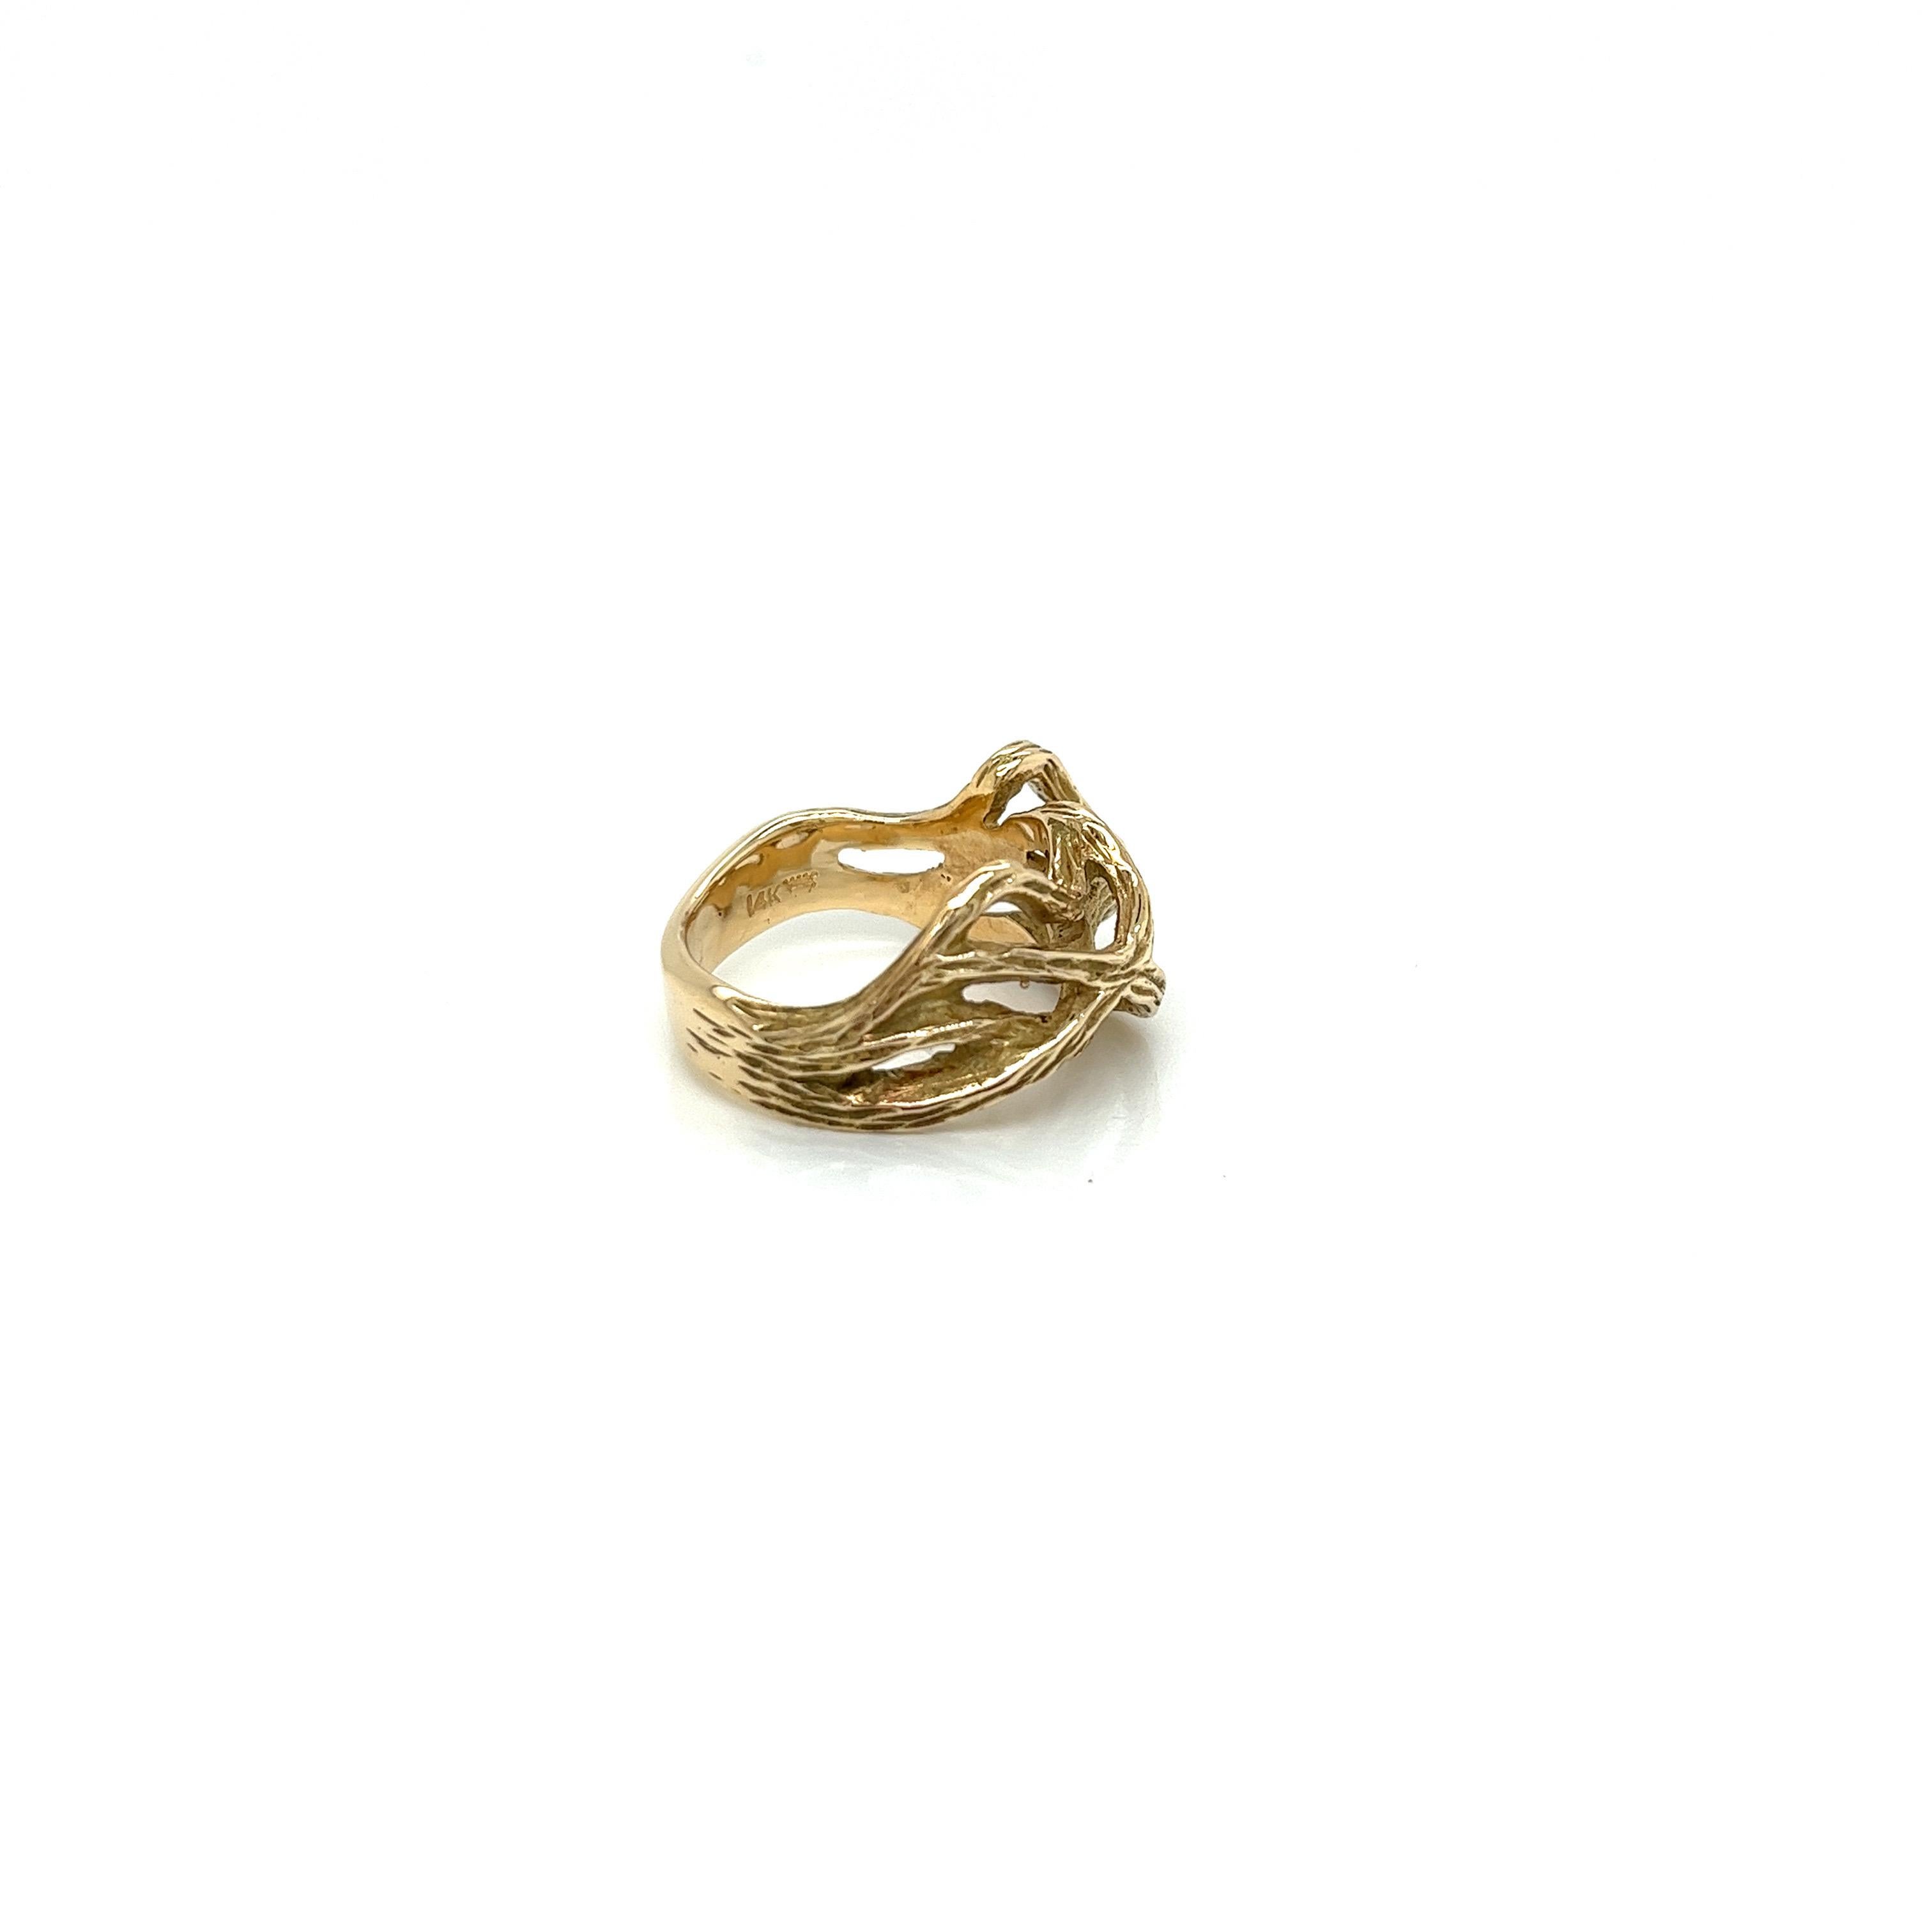 Vintage 1980's 14k Yellow Gold Twisted Gold Statement Ring Neuf - En vente à Boston, MA